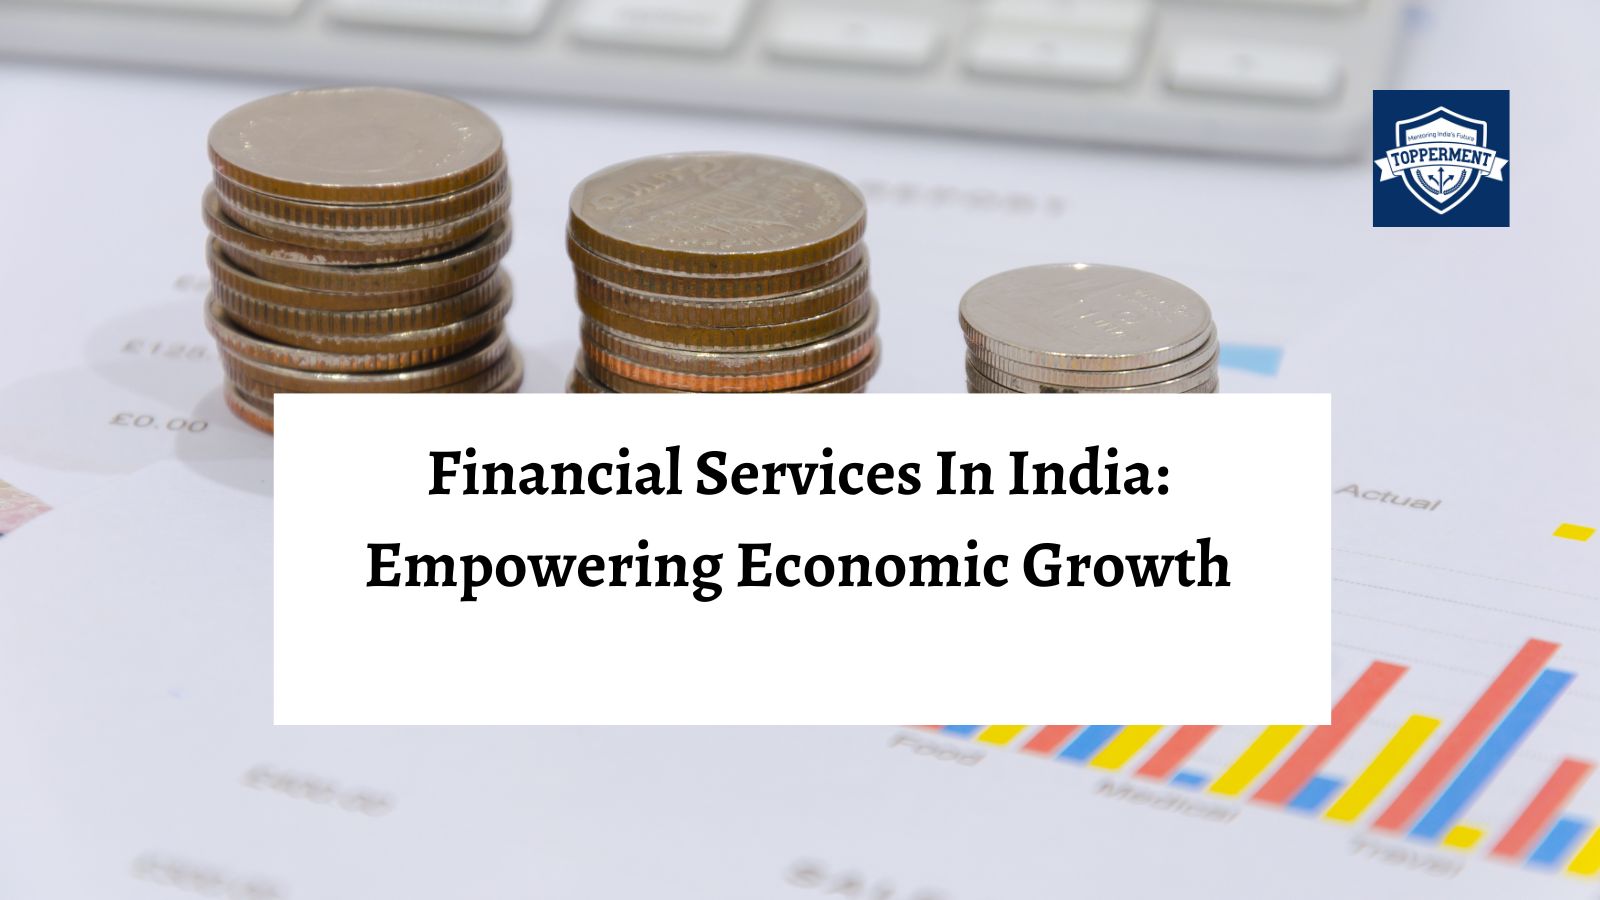 Financial Services in India Empowering Economic Growth | Best UPSC IAS Coaching For Guidance and Mentorship